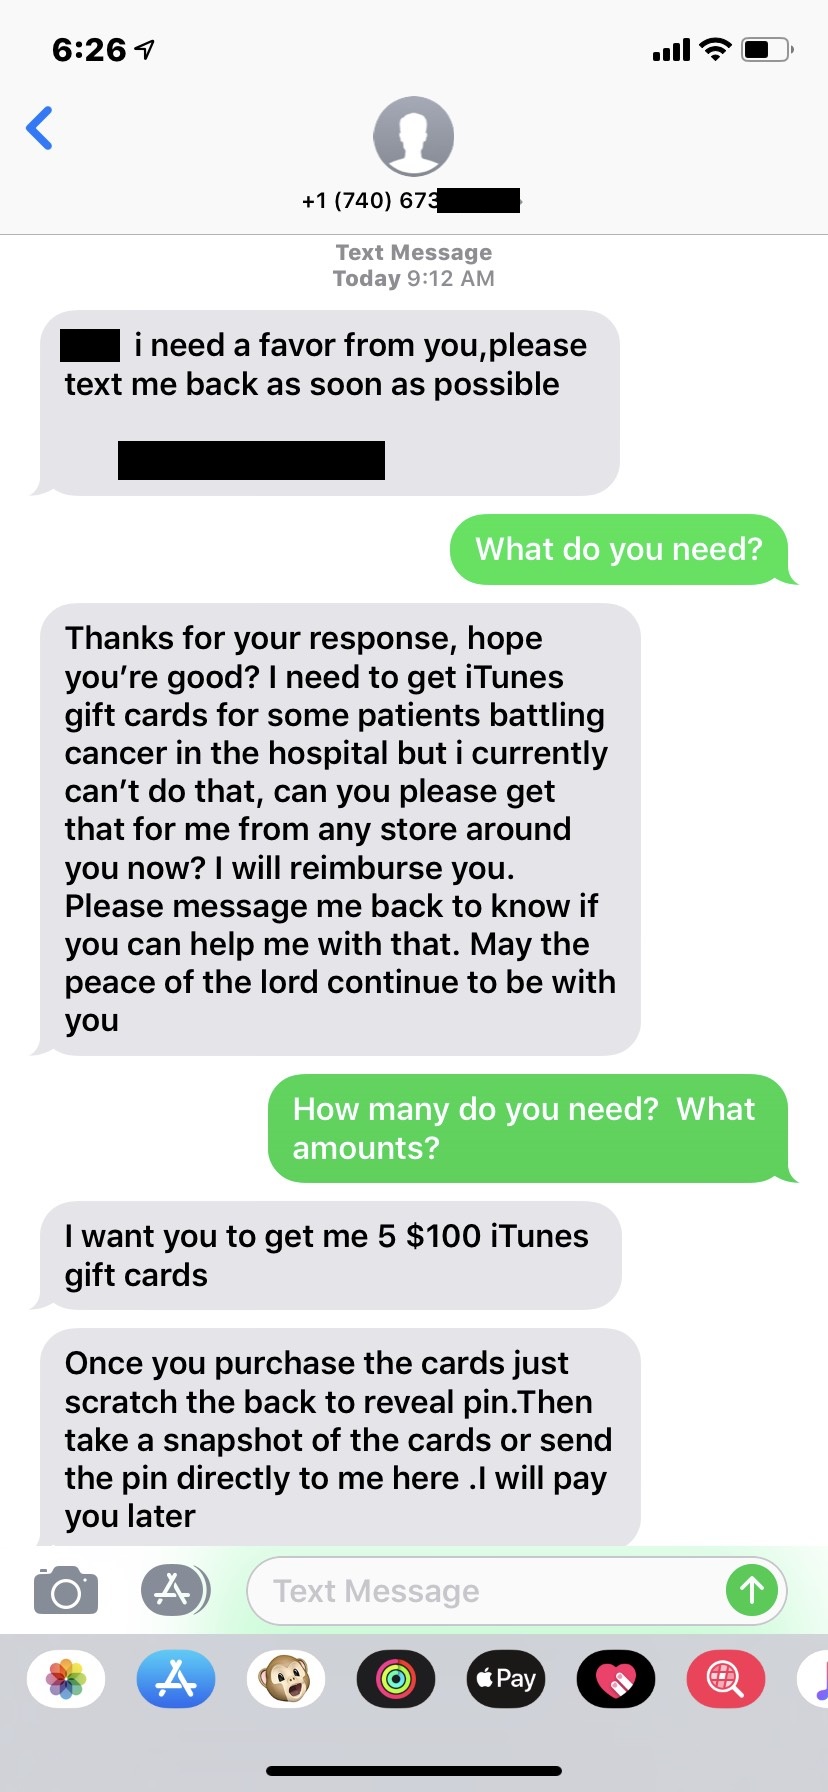 screenshot - 7 1 740 673 Text Message Today i need a favor from you, please text me back as soon as possible What do you need? Thanks for your response, hope you're good? I need to get iTunes gift cards for some patients battling cancer in the hospital bu